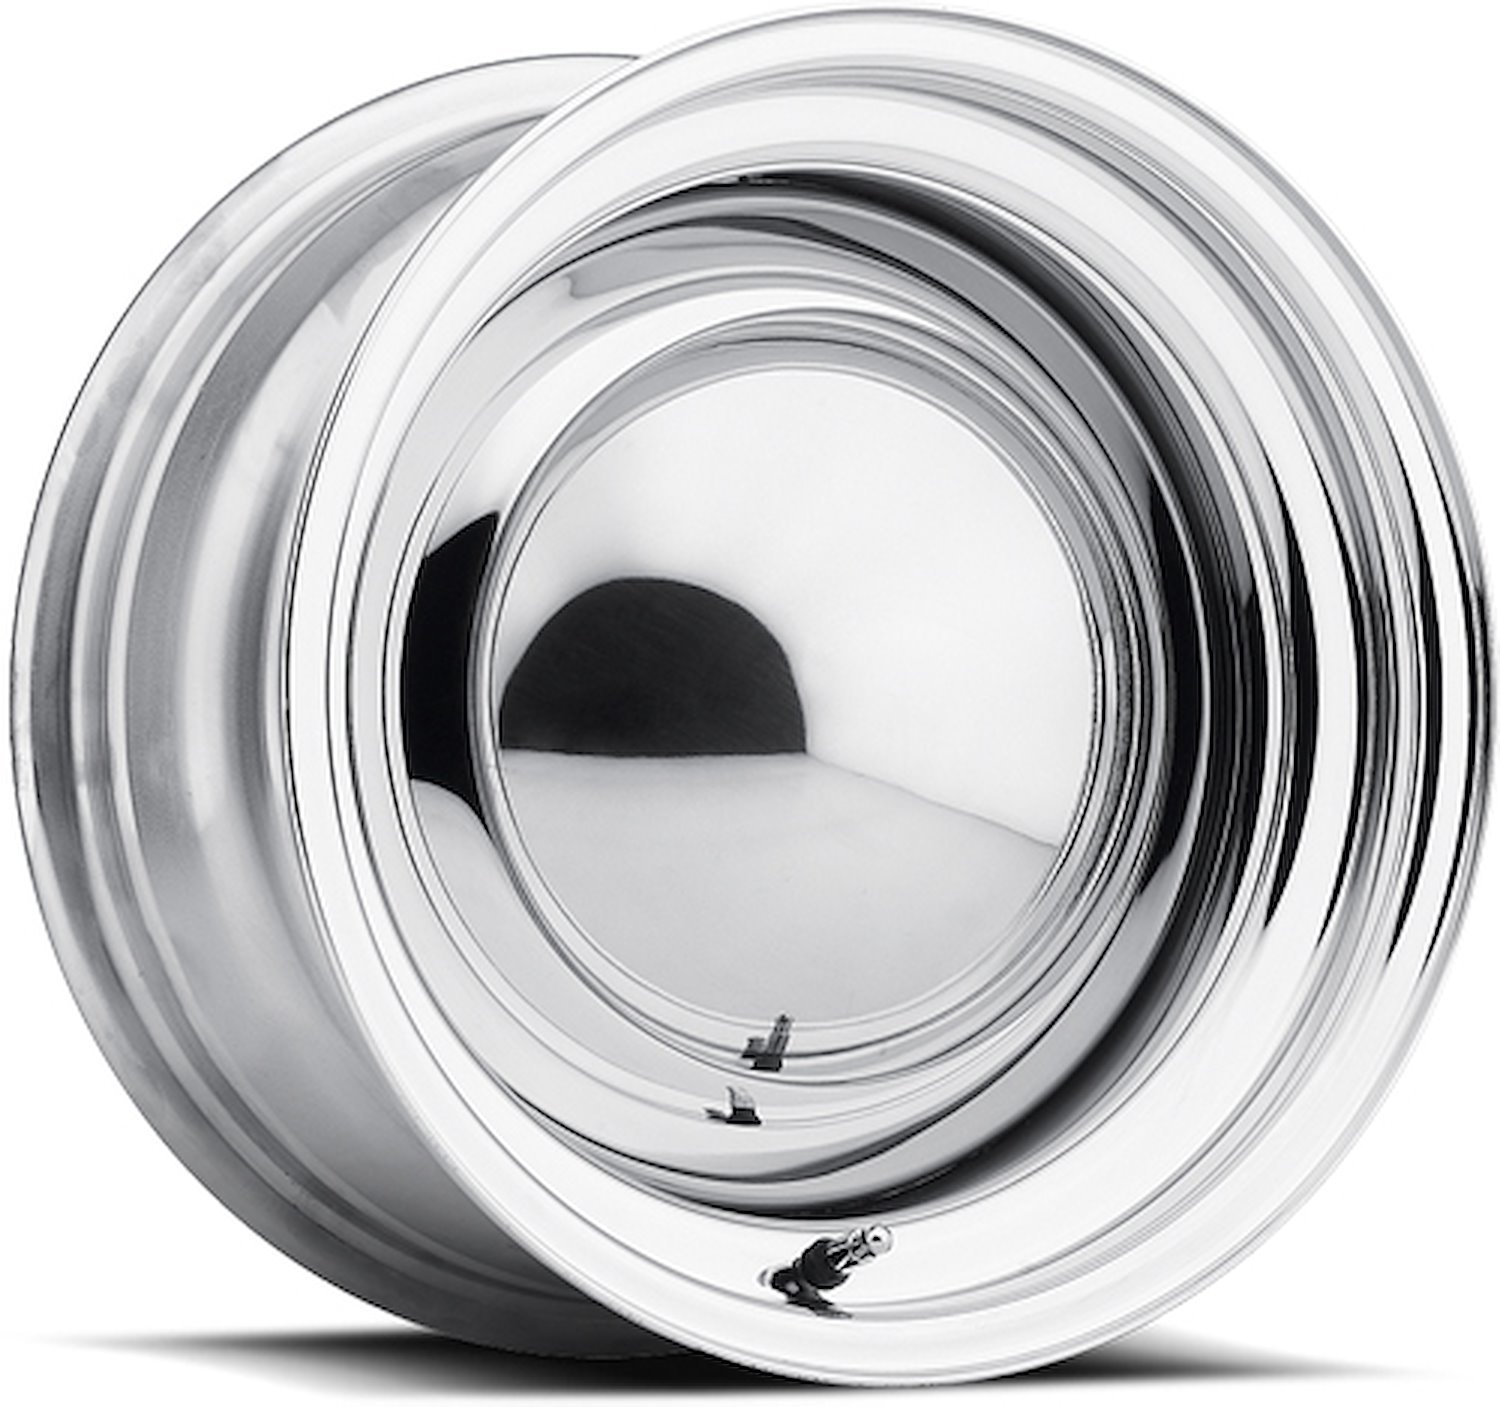 Solid Wheel Chrome 15X8 5X45 5X475 Bolt Circle 45 Back Spacing 0 offset 319 Center Bore 1500 lbs Load Rating